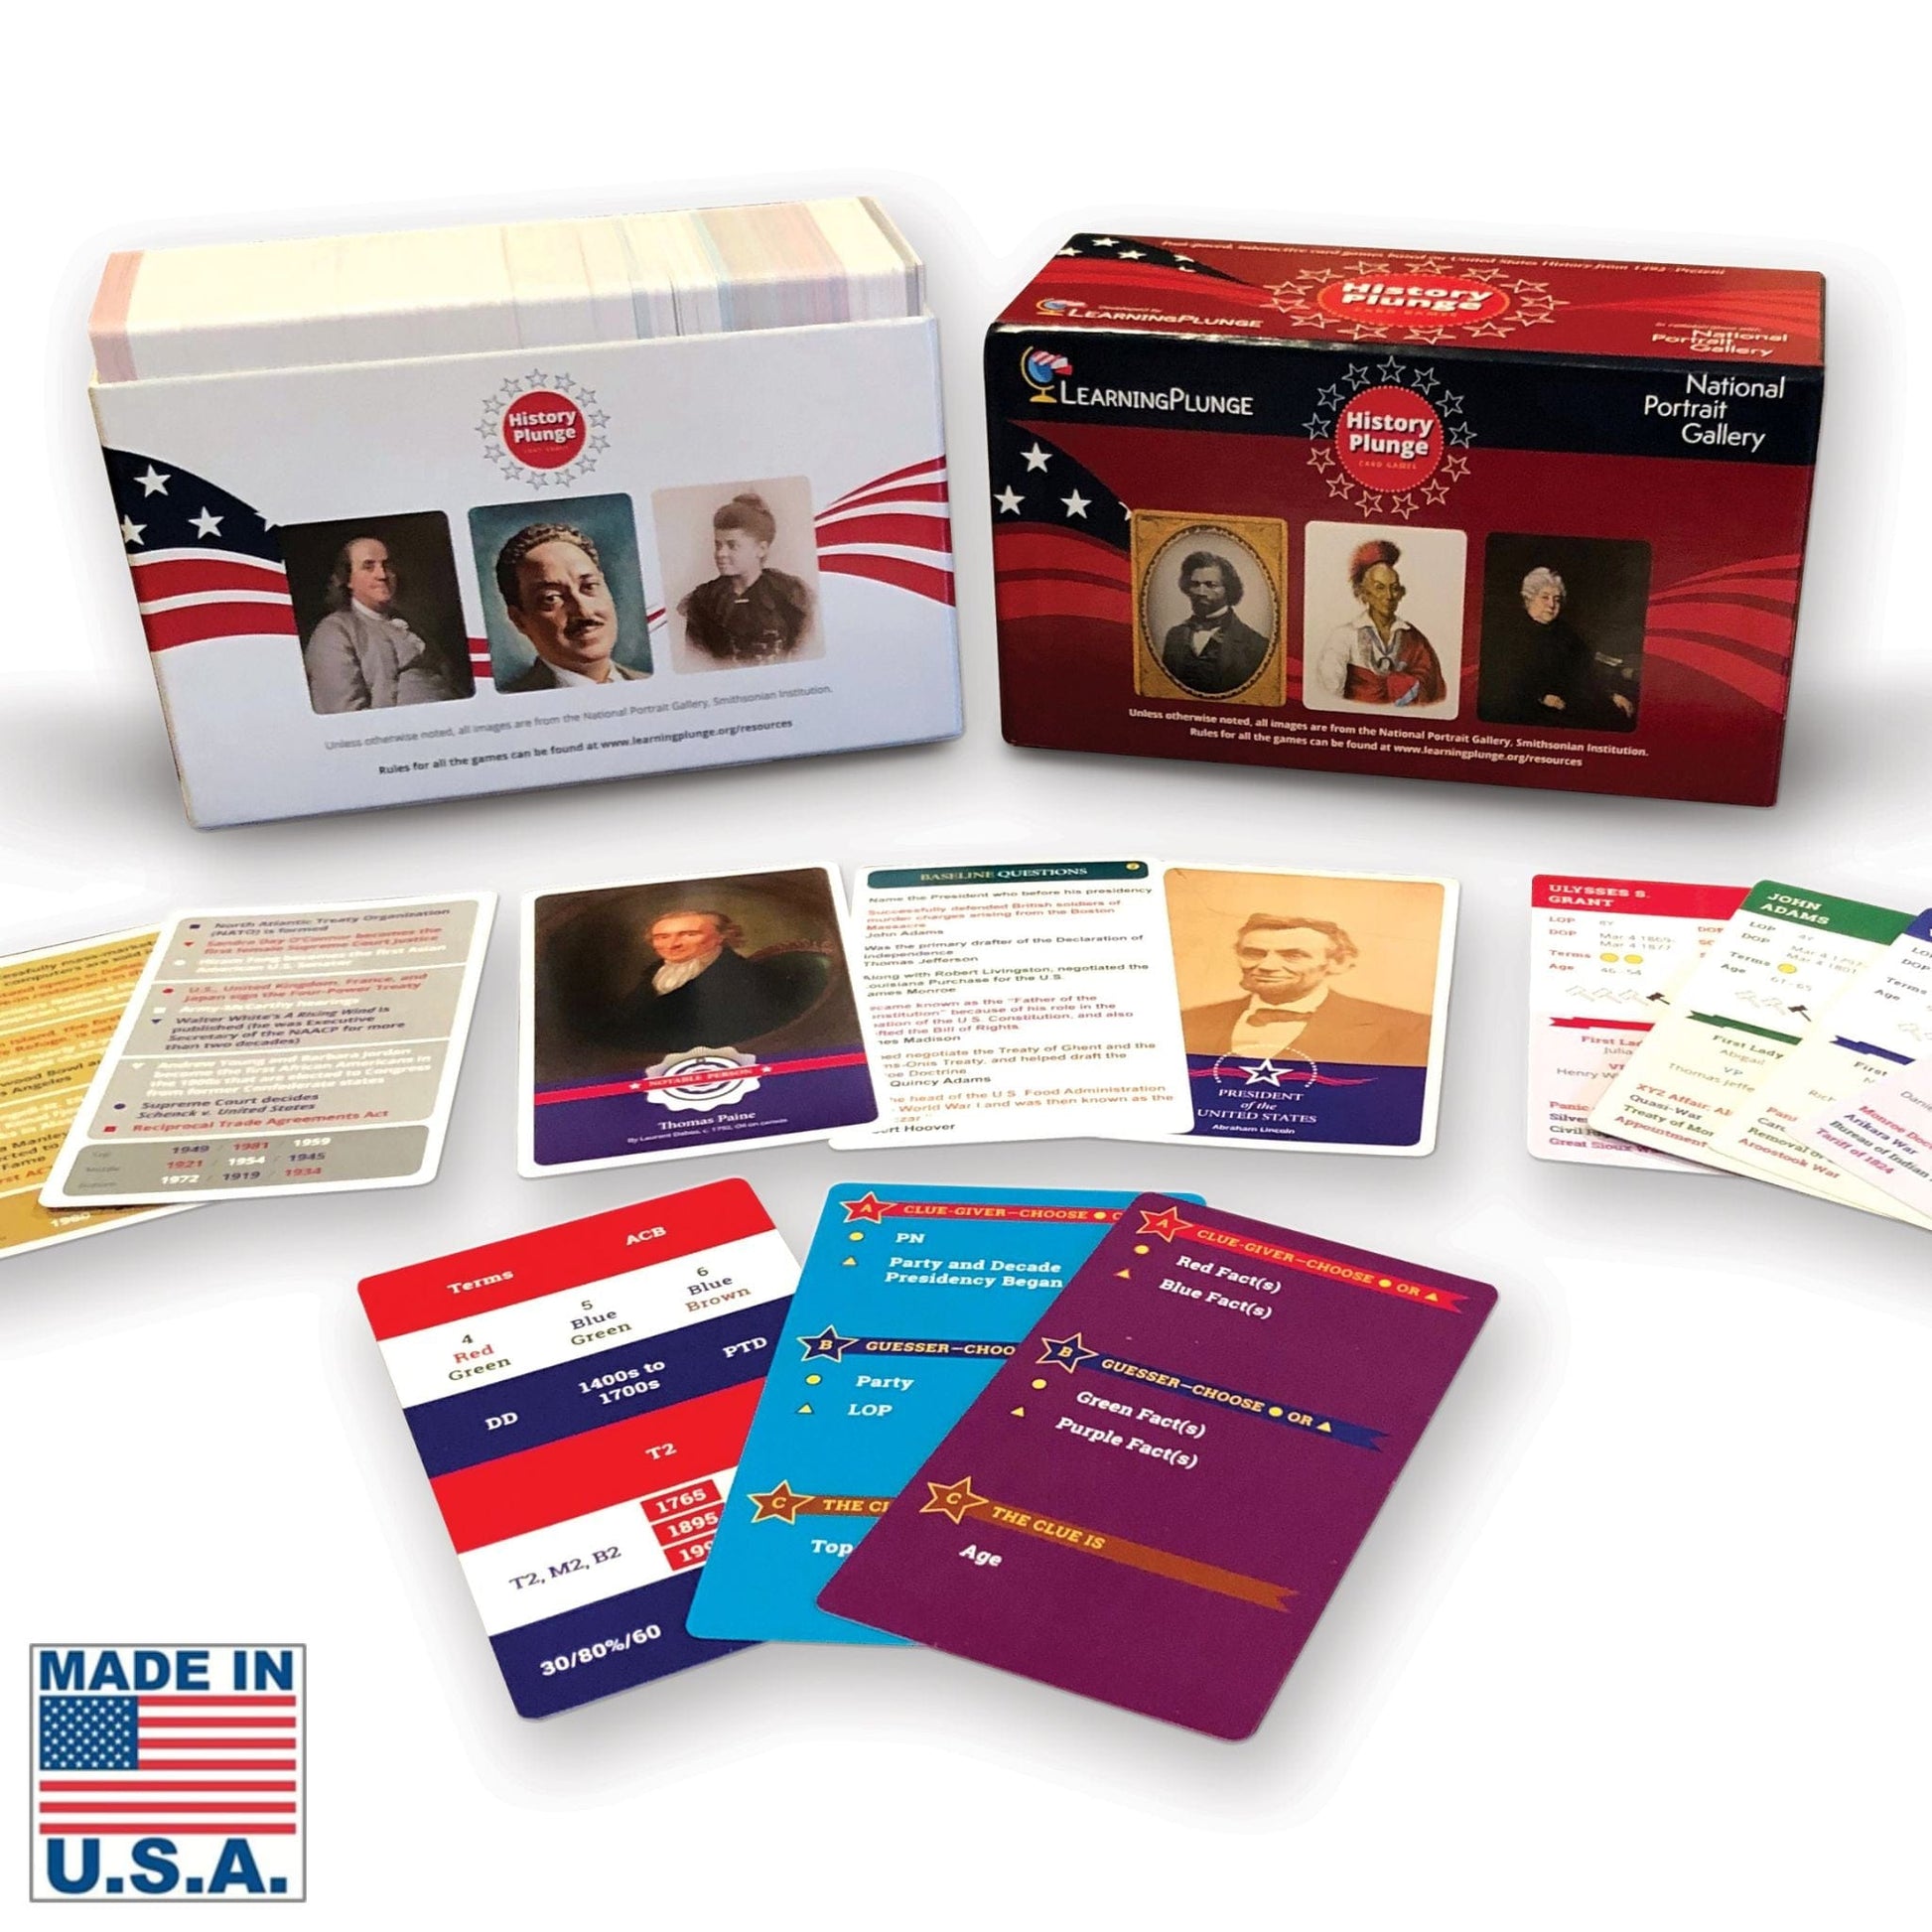 HistoryPlunge card game from The History List